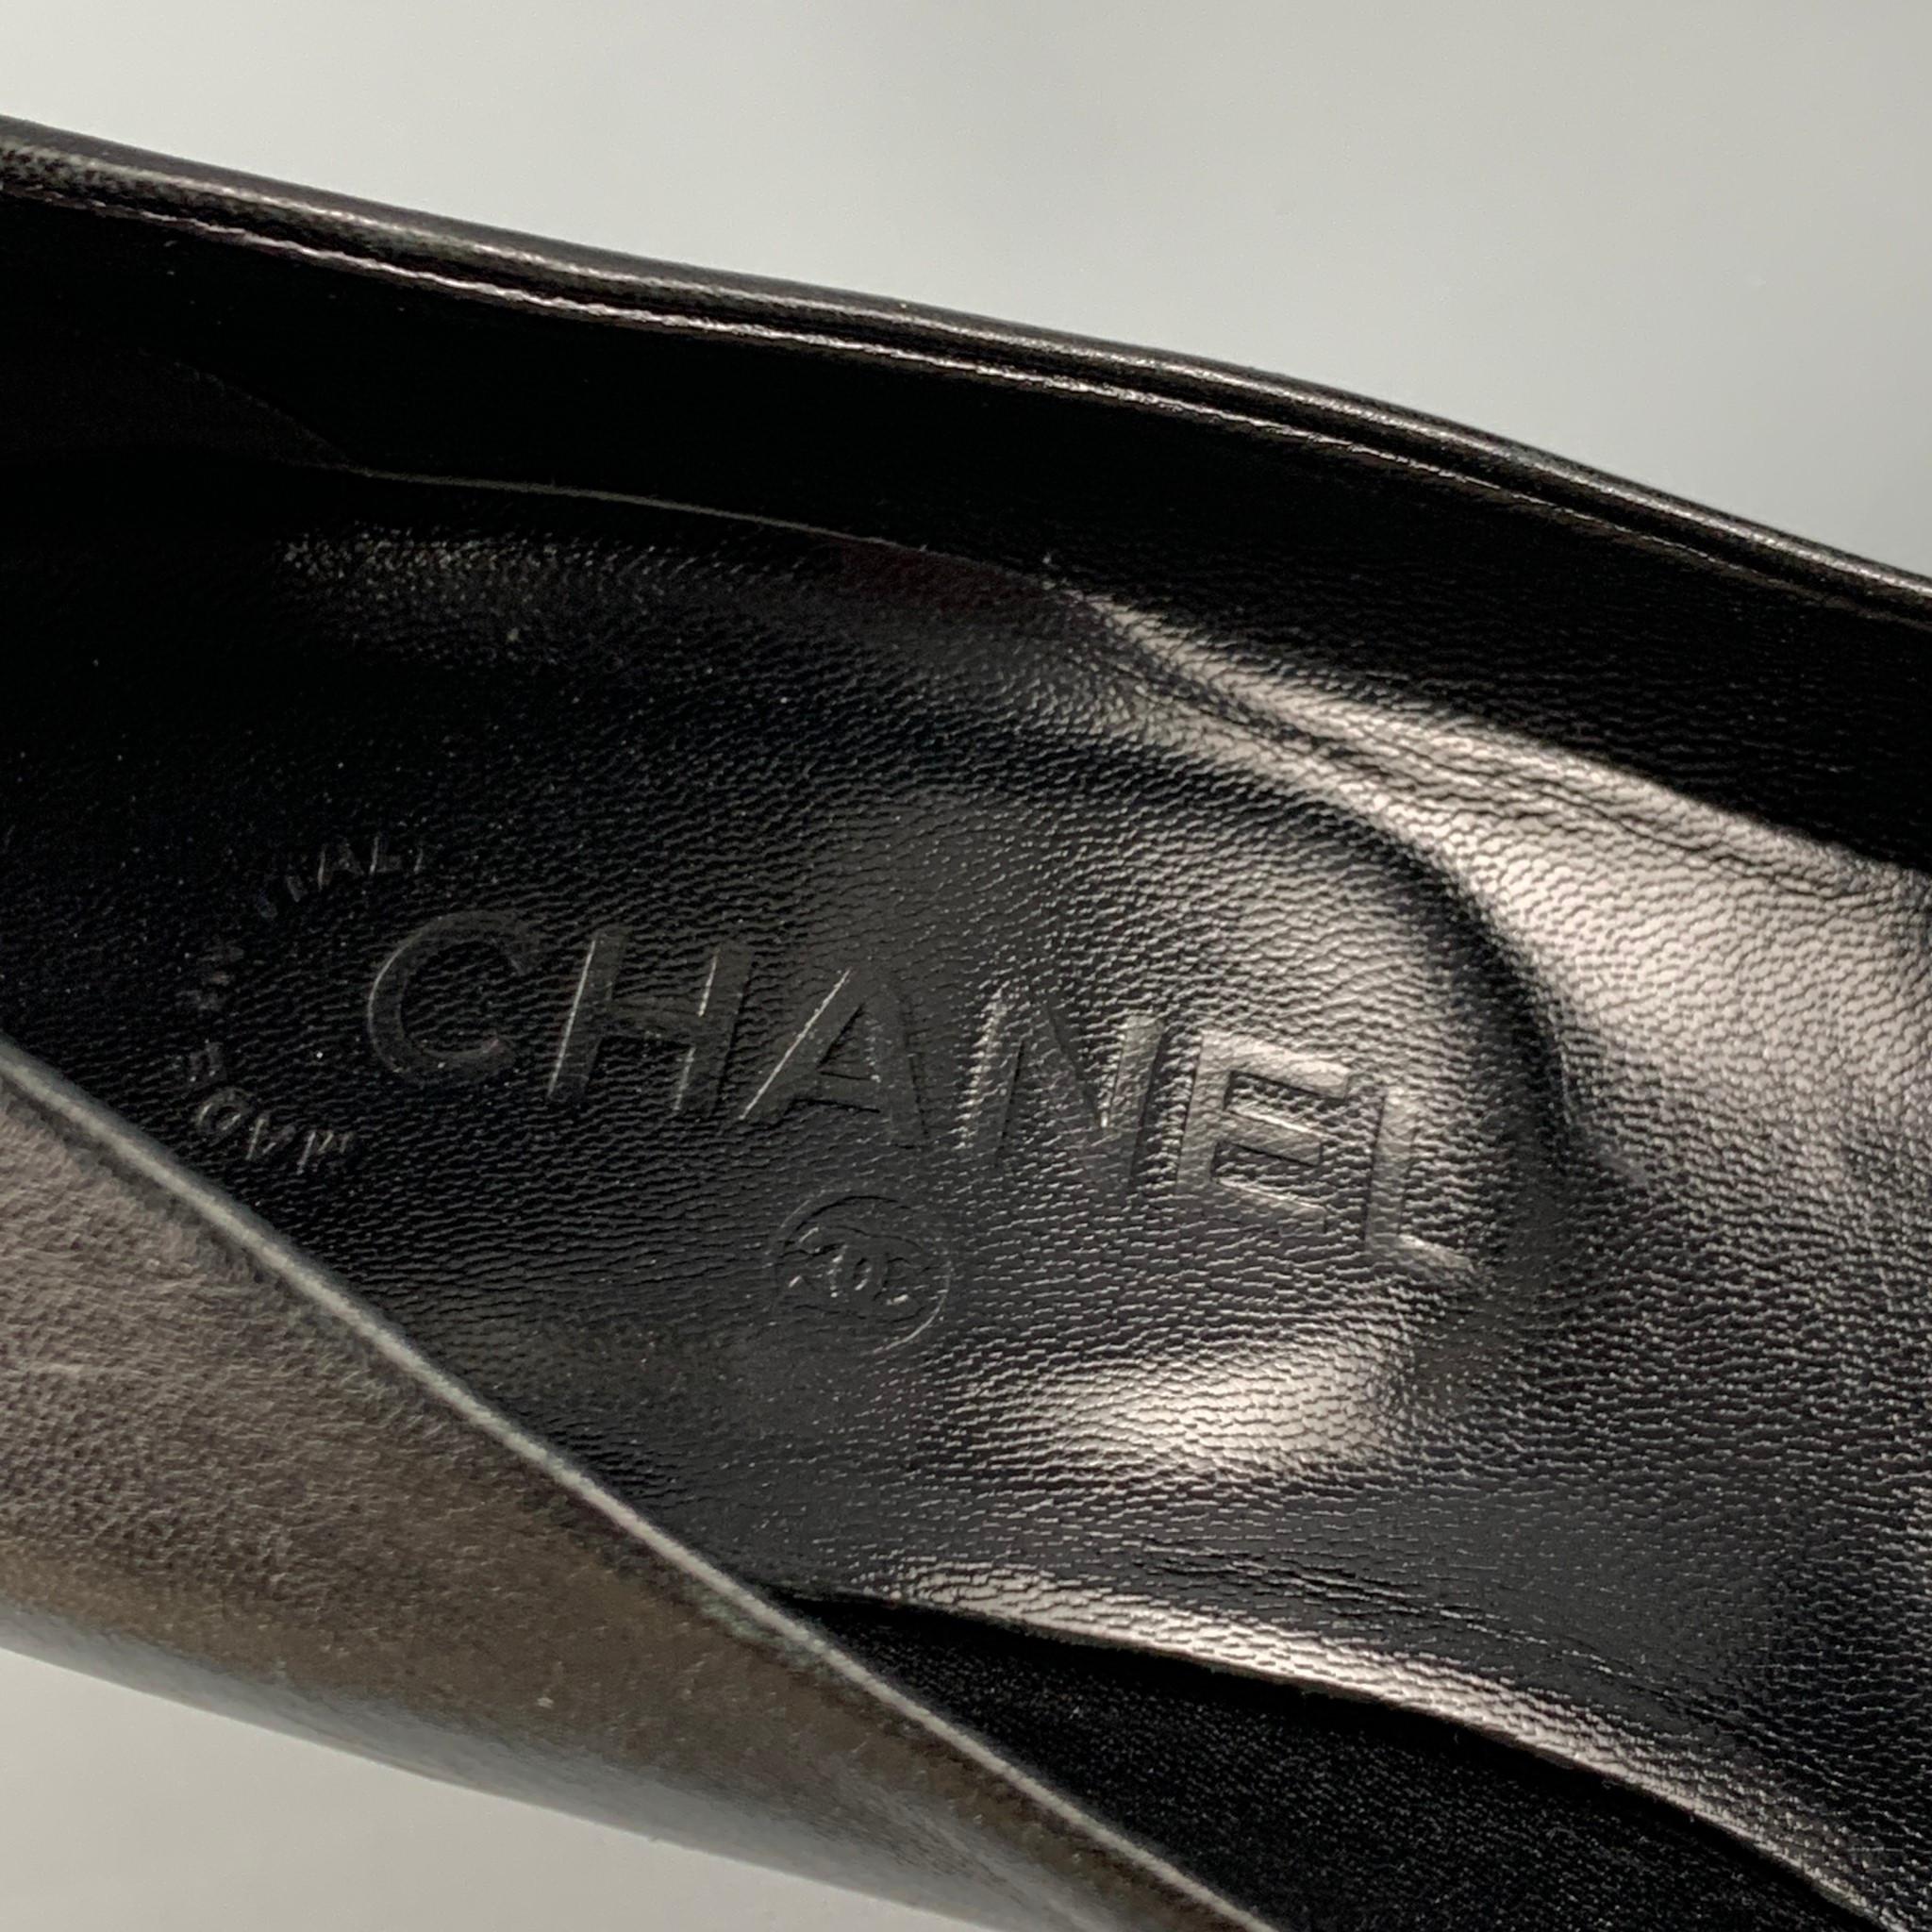 CHANEL Size 7 Black Leather Pointed Toe Pumps 2